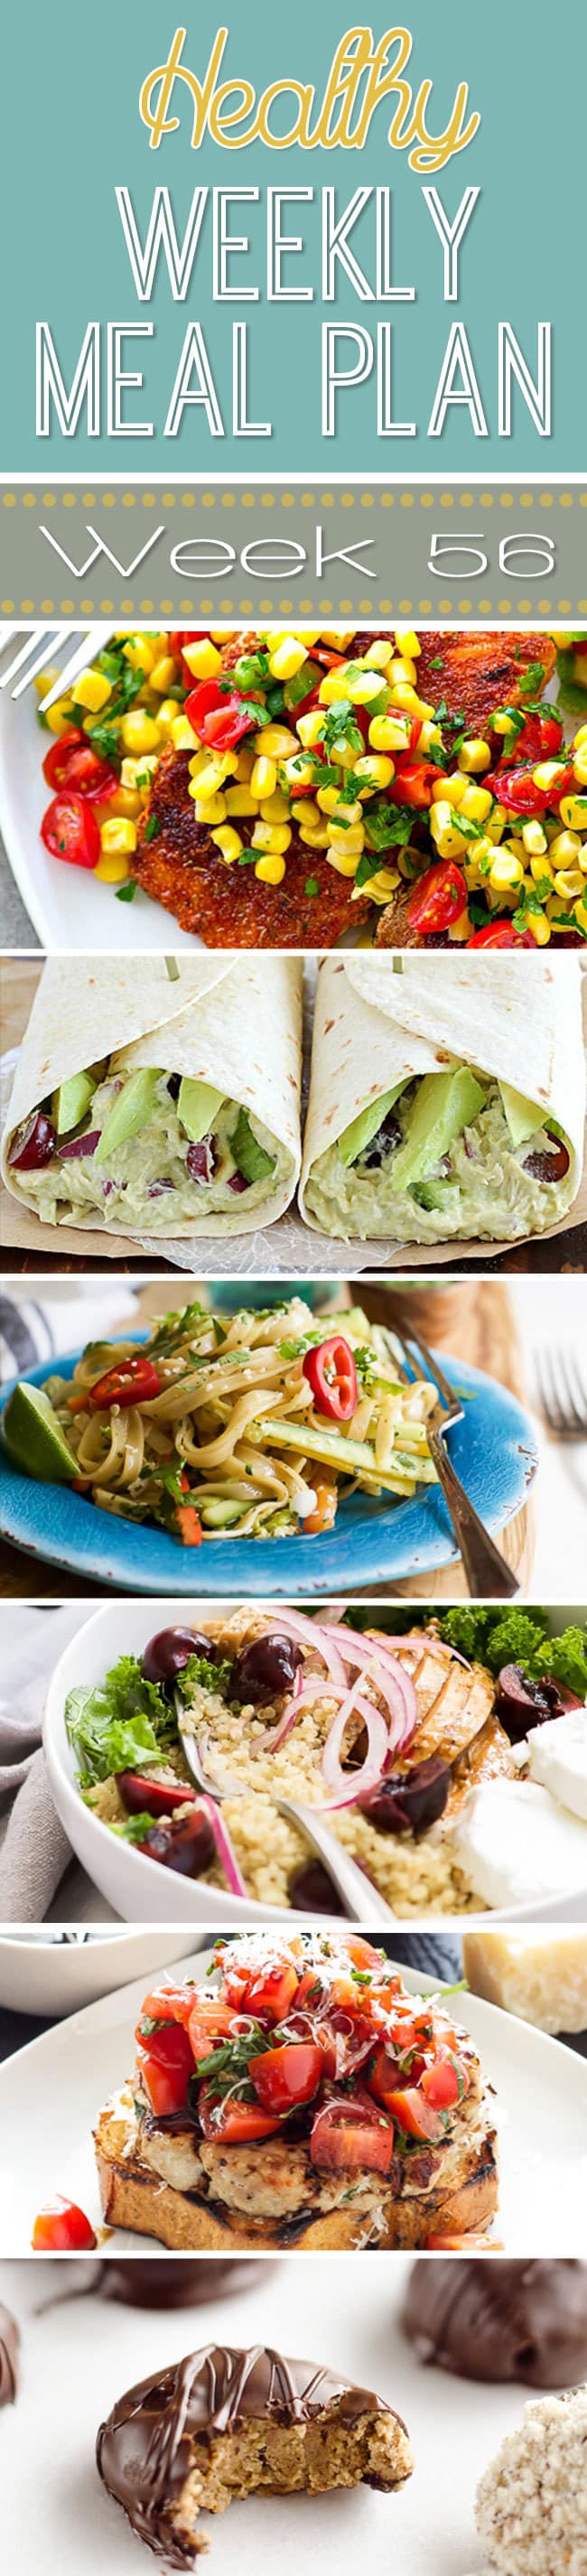 Healthy Weekly Meal Plan #56 has some incredible healthy dinner recipes for you to try this week! Plus a breakfast, lunch, snack, side dish and drink recipe too. So many great healthy recipes all in one place for you!